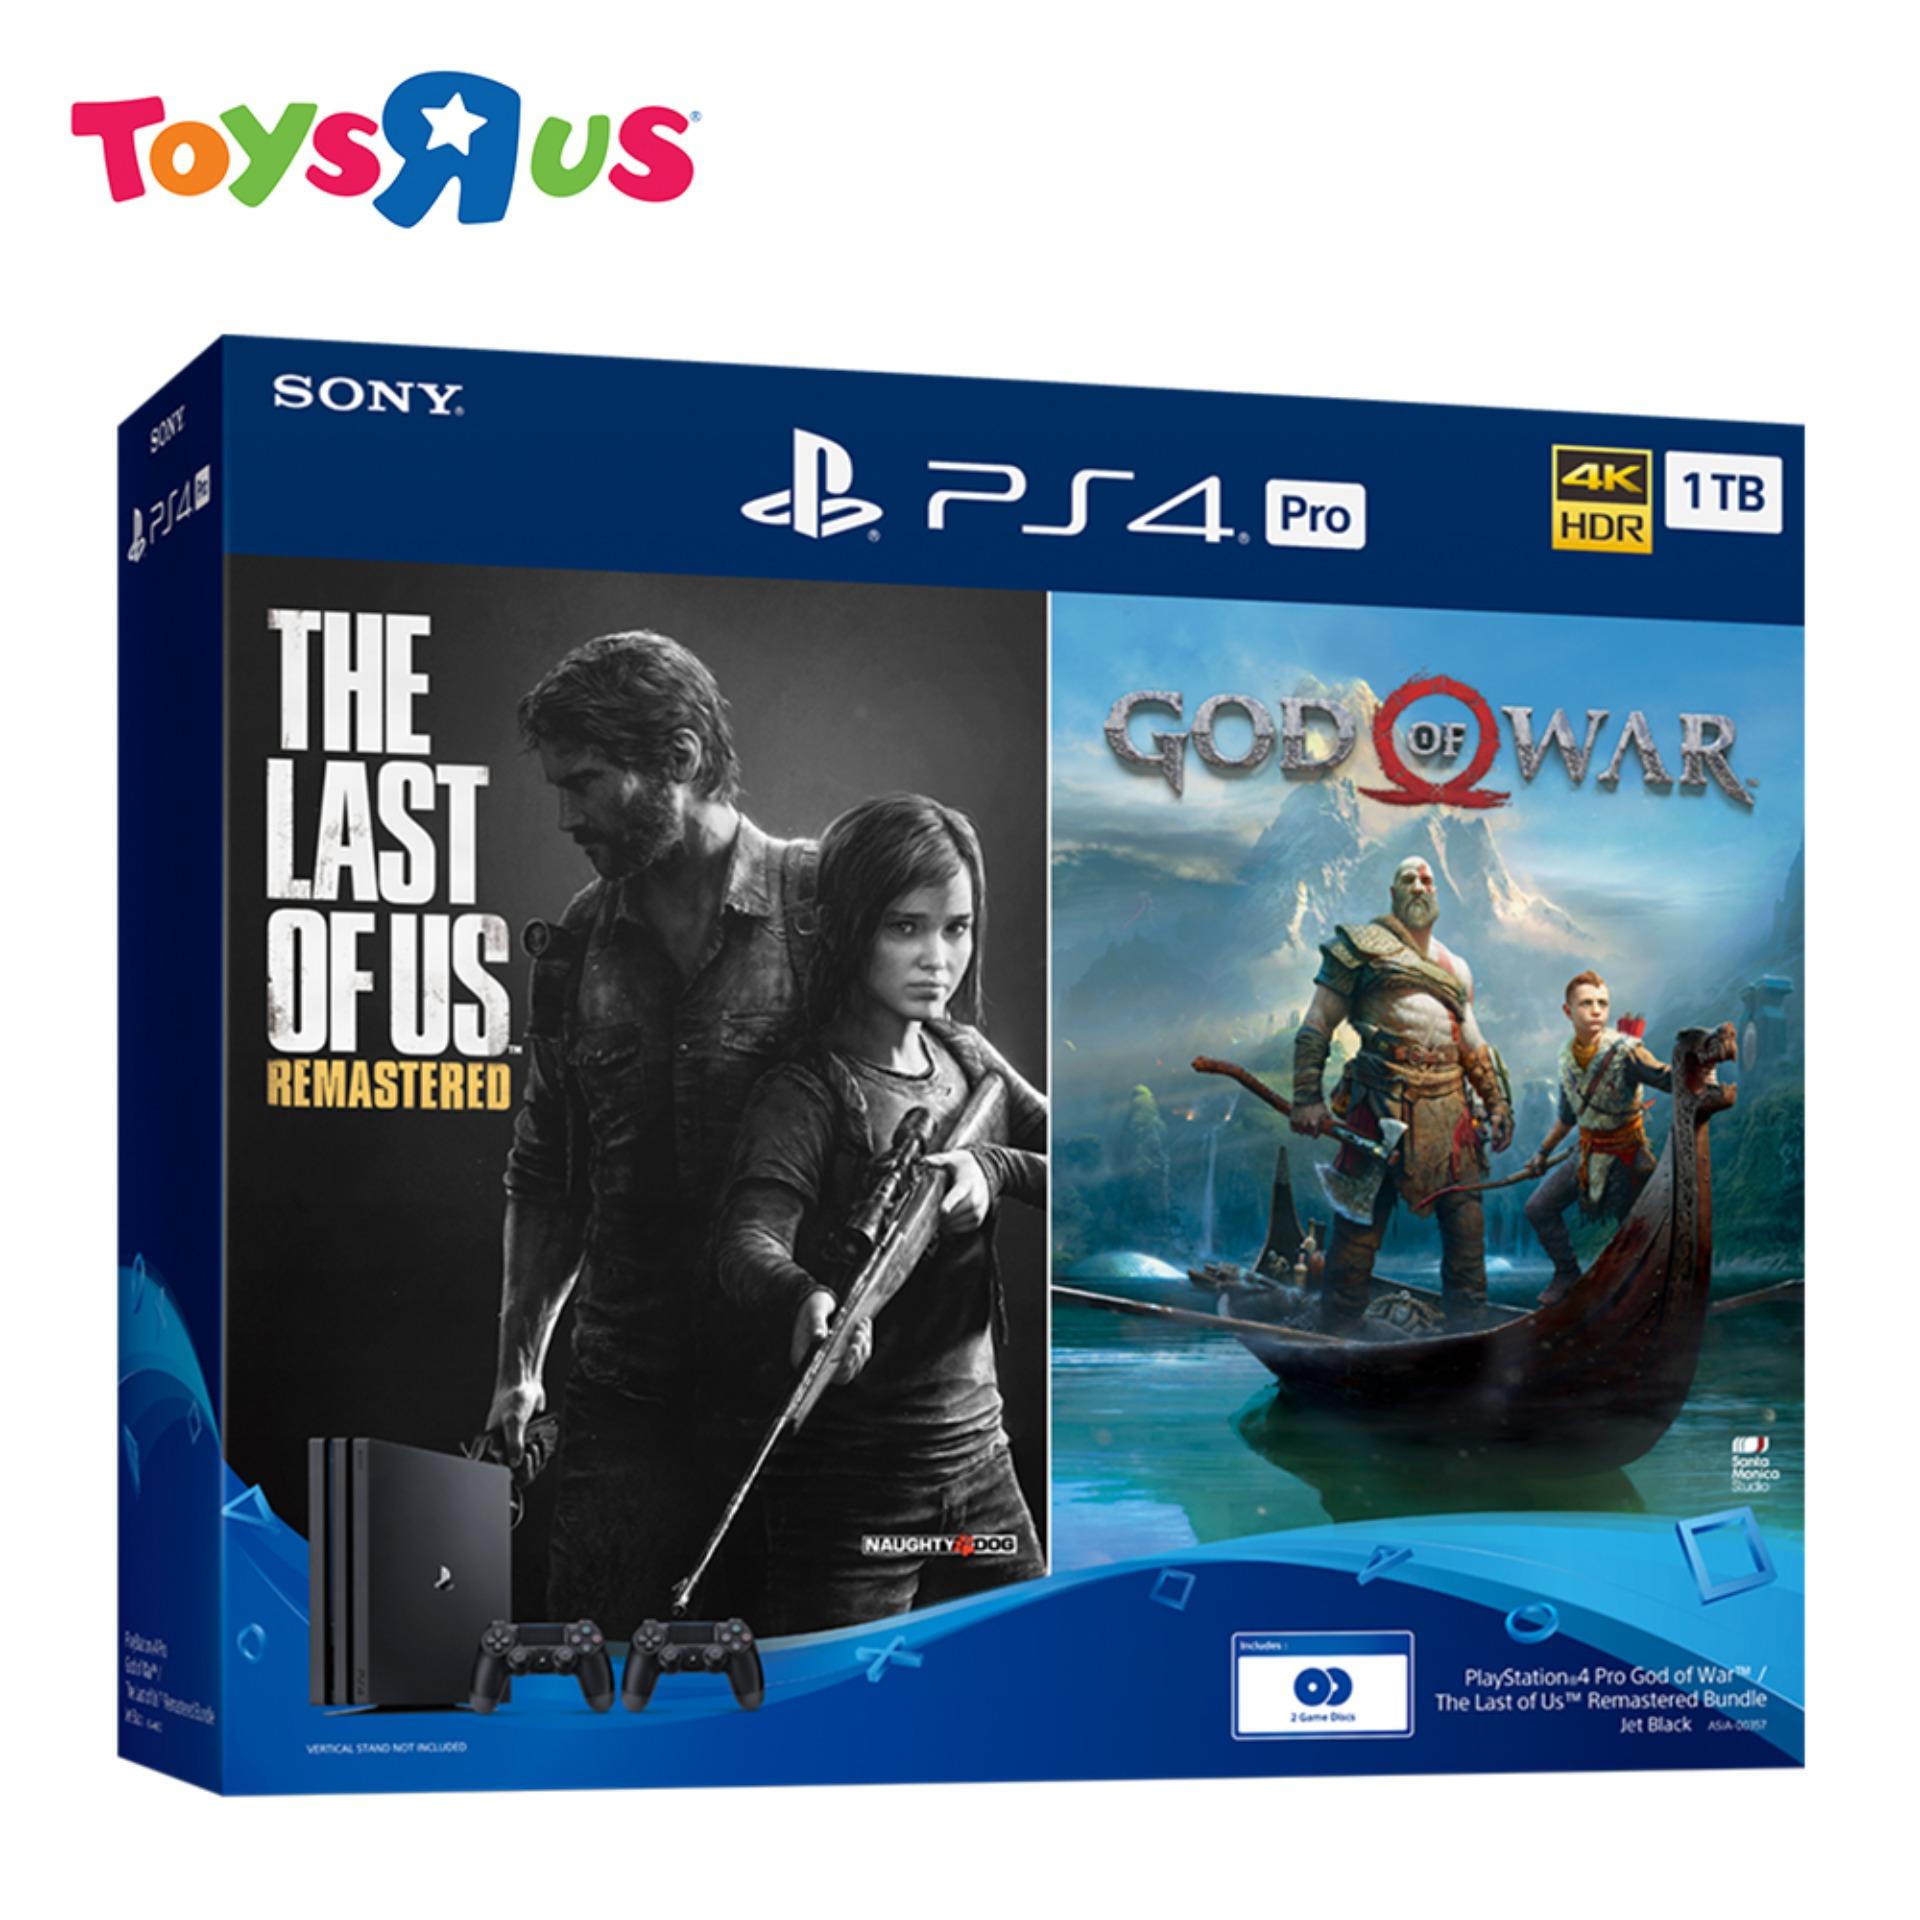 Выход playstation 4 pro. Sony PLAYSTATION 4 Slim Limited Edition the Lust of us. The last of us 2 ps4 Pro. Ps4 Pro CUH 7218. Ps4 Pro last of us.